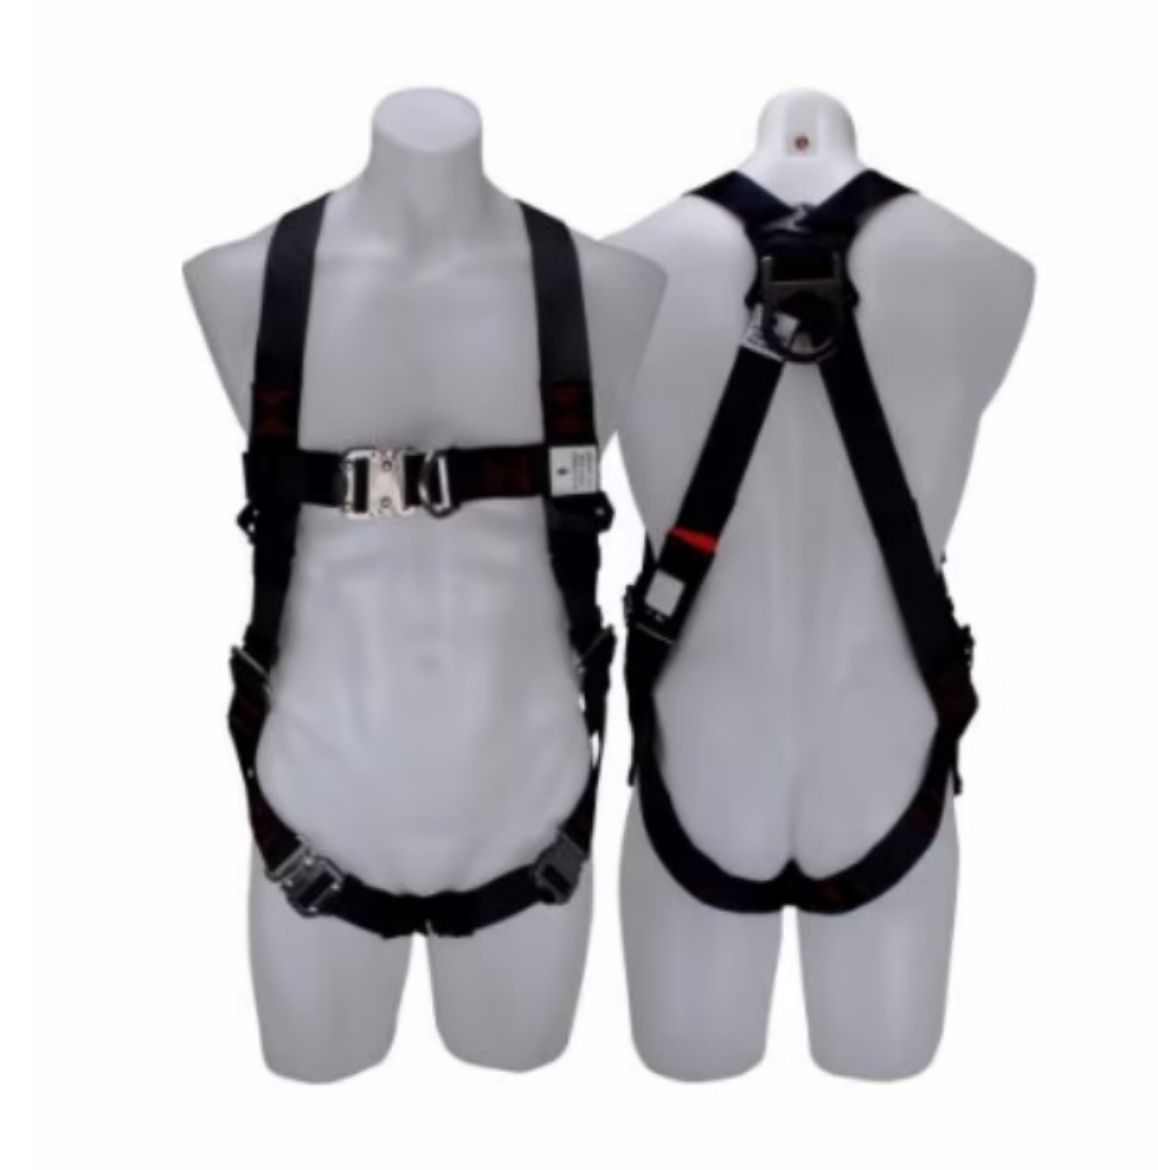 Picture of 1130116 PROTECTA P200 RIGGERS HARNESS - UNIVERSAL SIZE